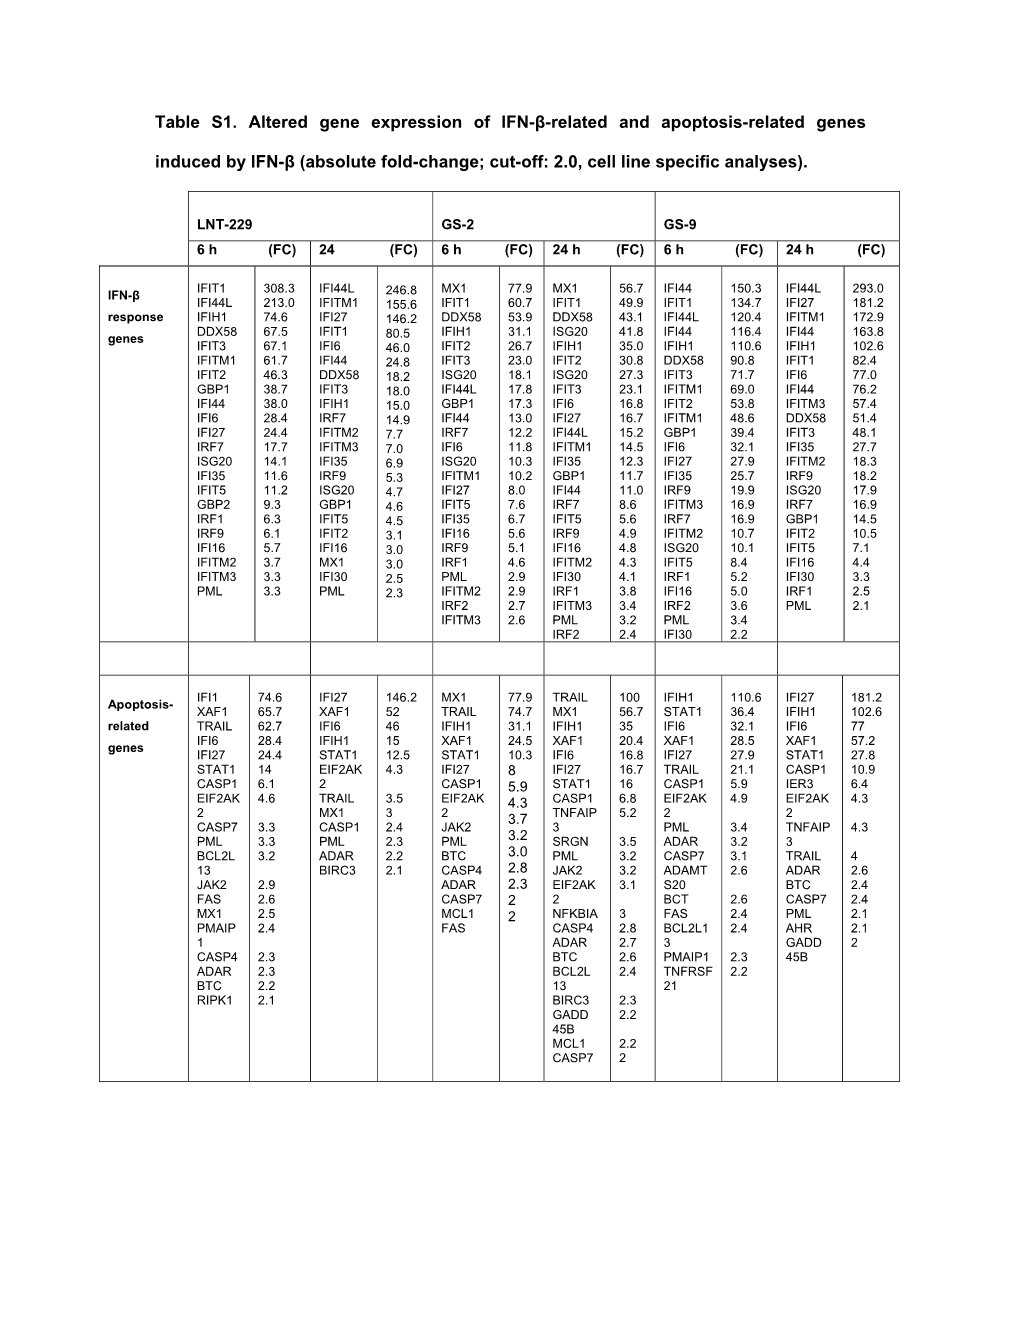 Table S1. Altered Gene Expression of IFN-Β-Related and Apoptosis-Related Genes